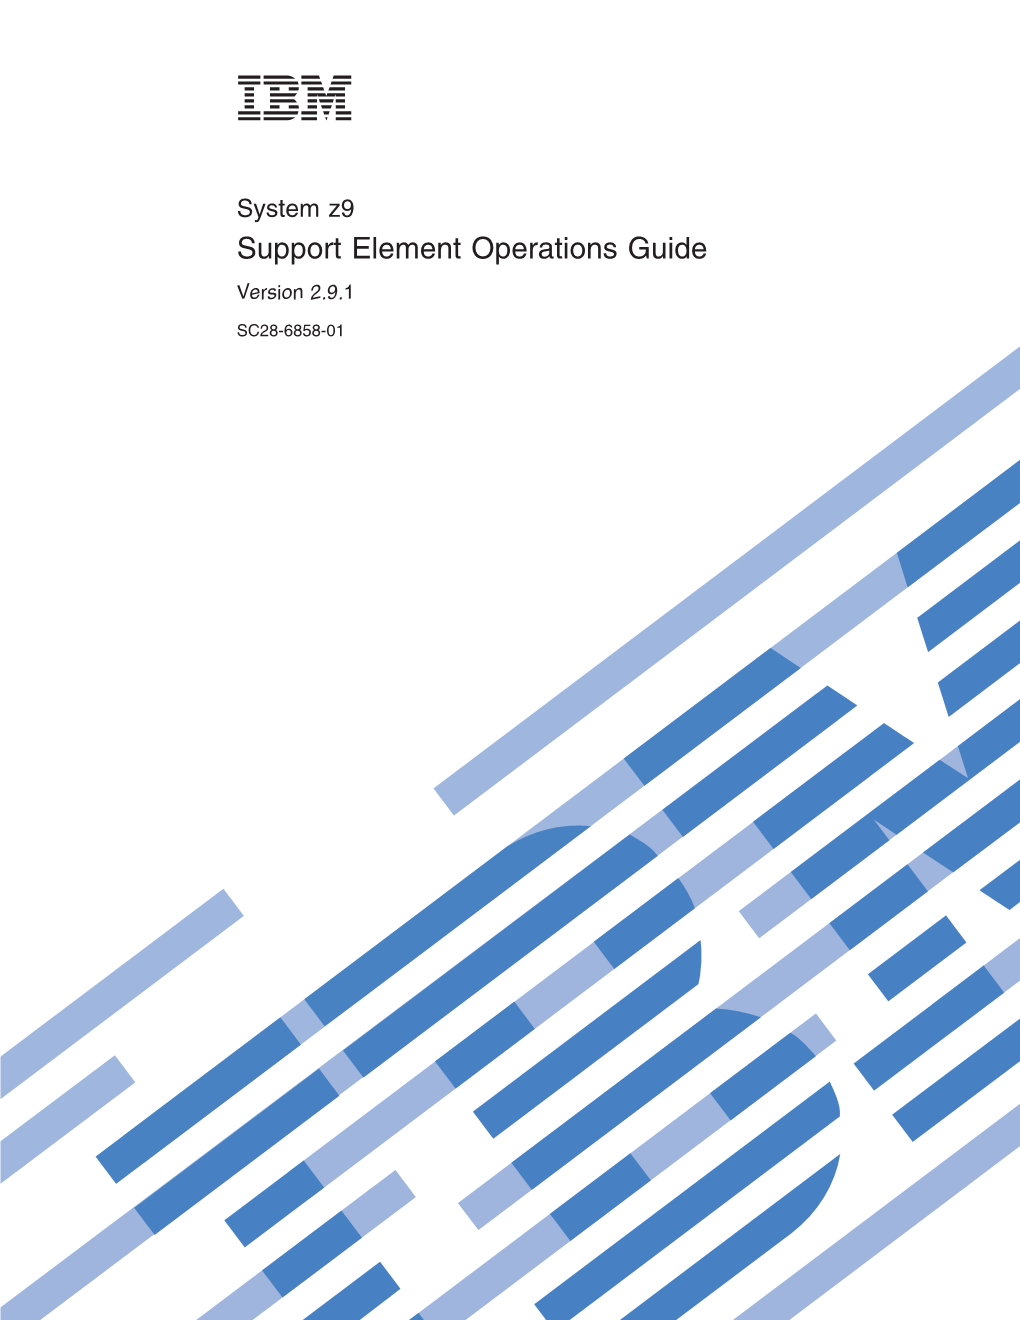 Support Element Operations Guide